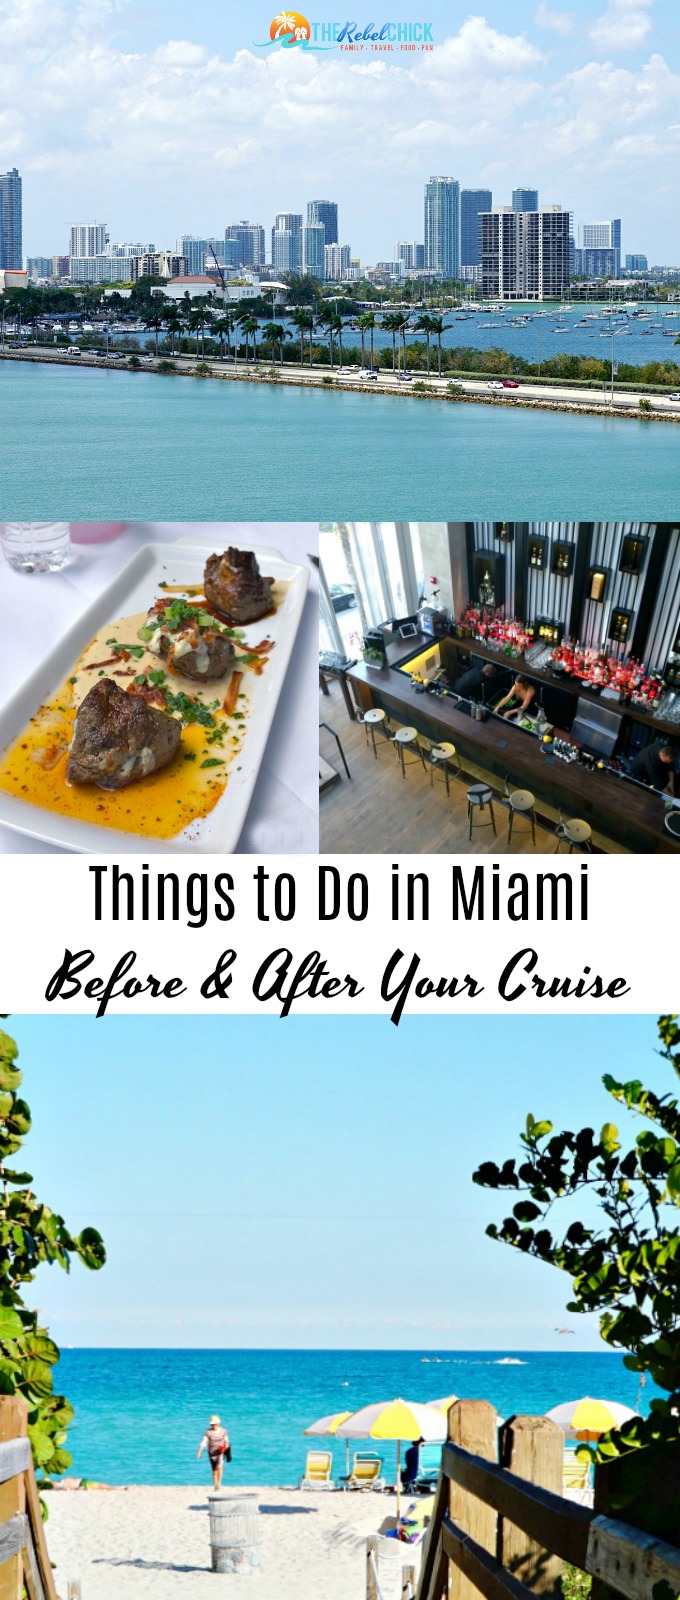 Things to do in Miami Before and After Your Cruise